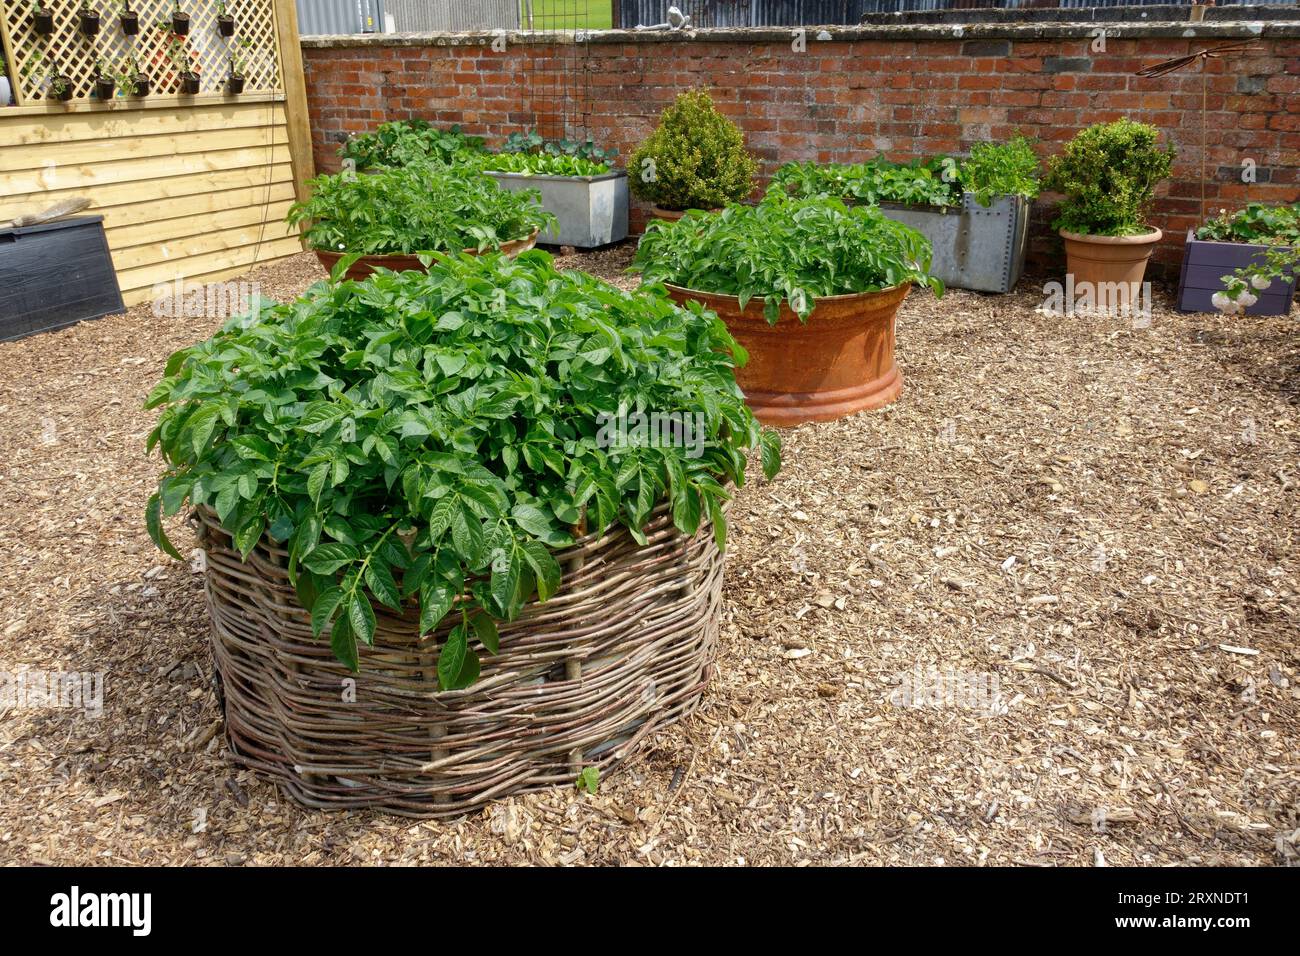 Potatoes growing in wicker raised beds and old tractor wheels on gravelled area in Cotswolds UK Stock Photo